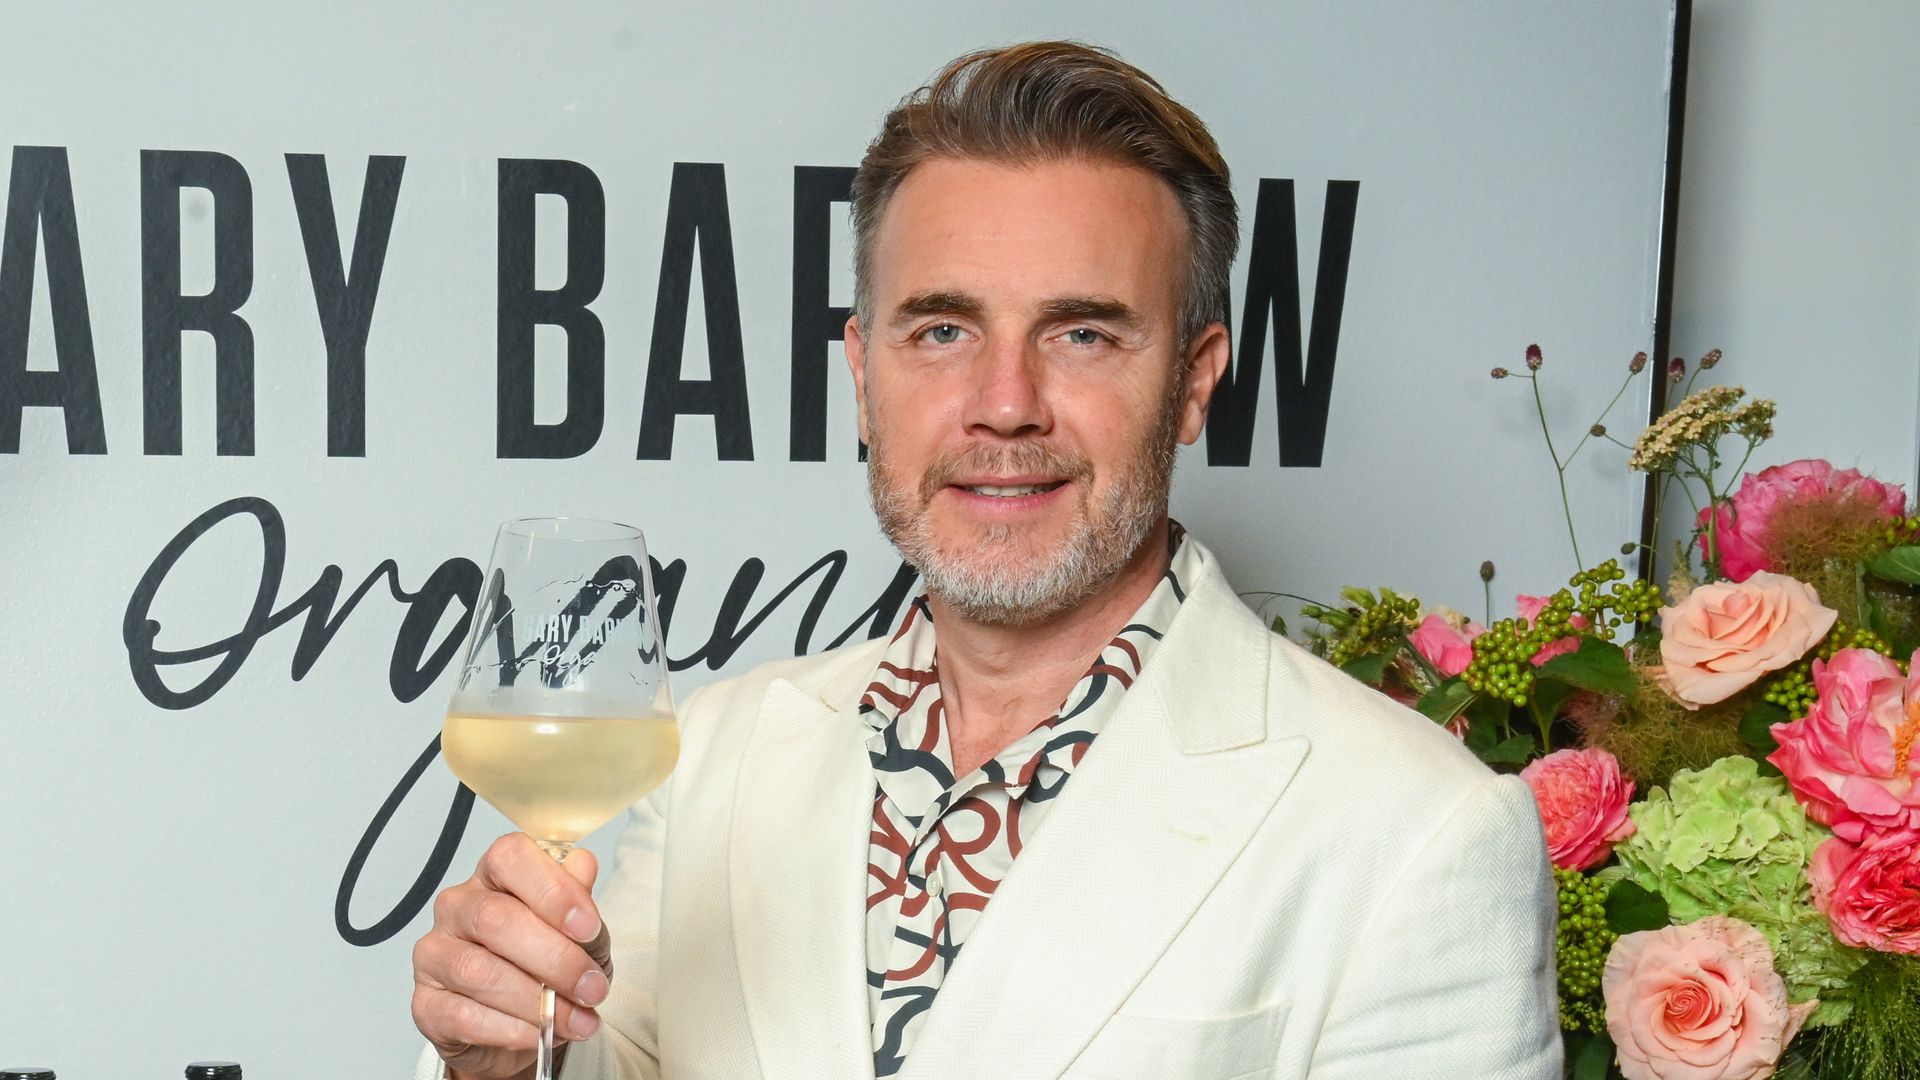 Gary Barlow raising a glass of wine at the launch of his wine brand